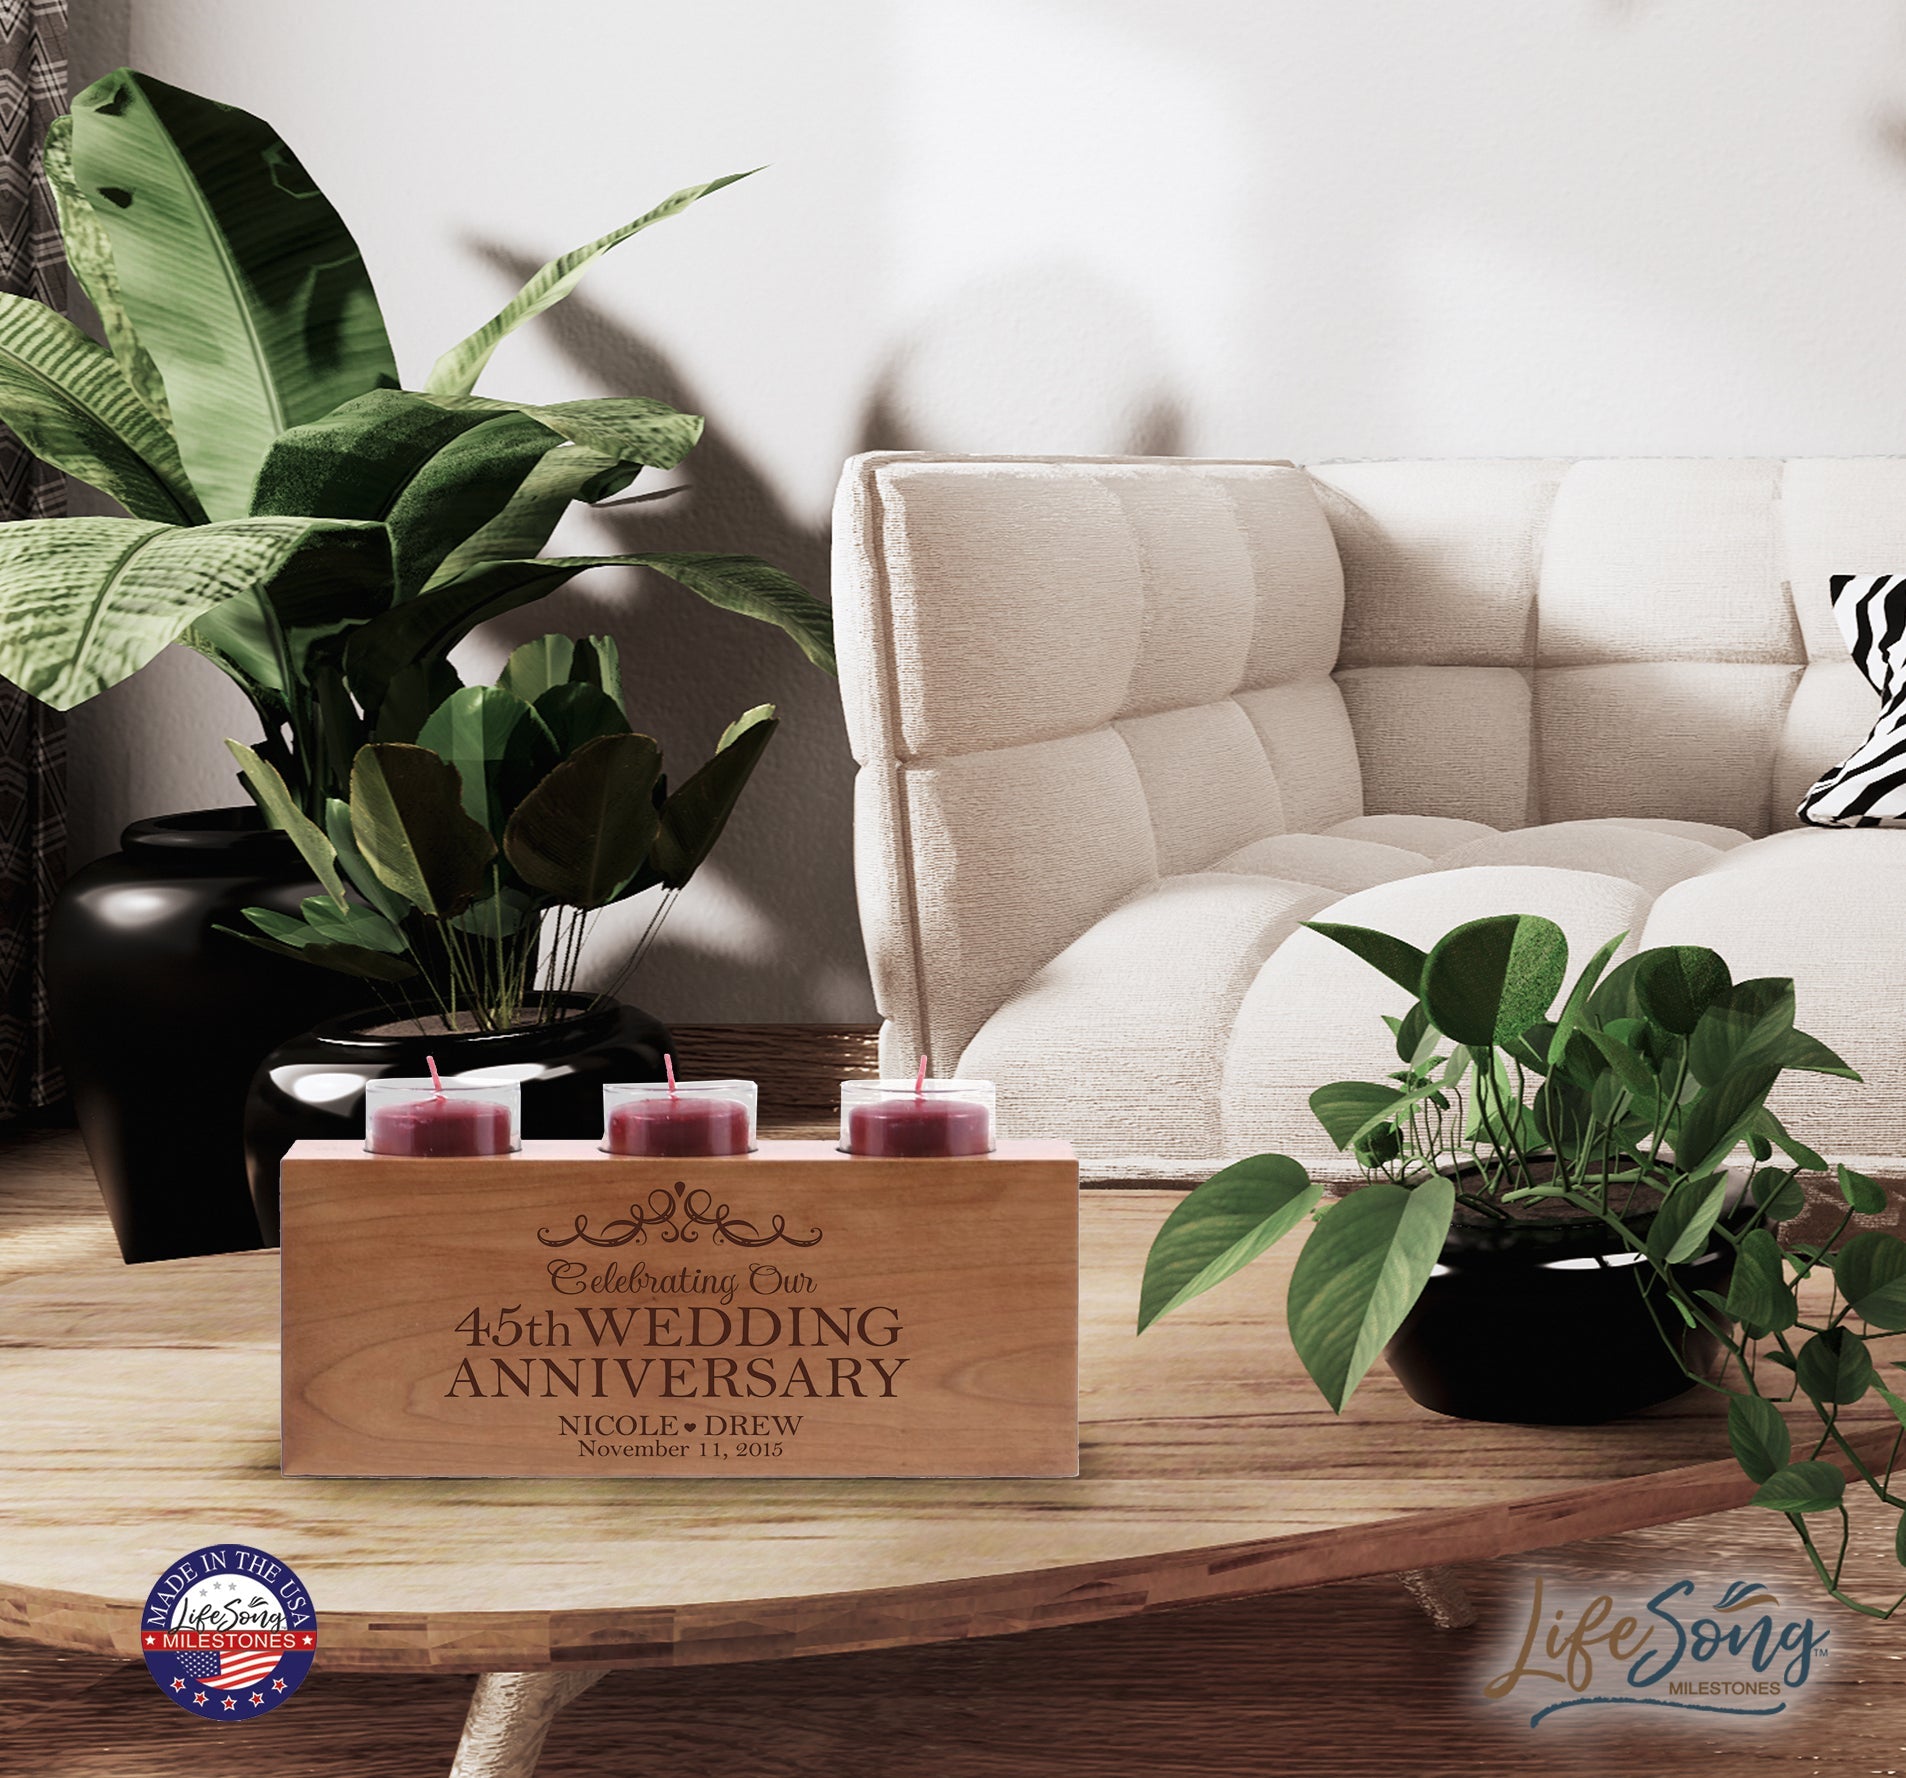 Personalized 45th Anniversary Candle Holder - Celebrating - LifeSong Milestones